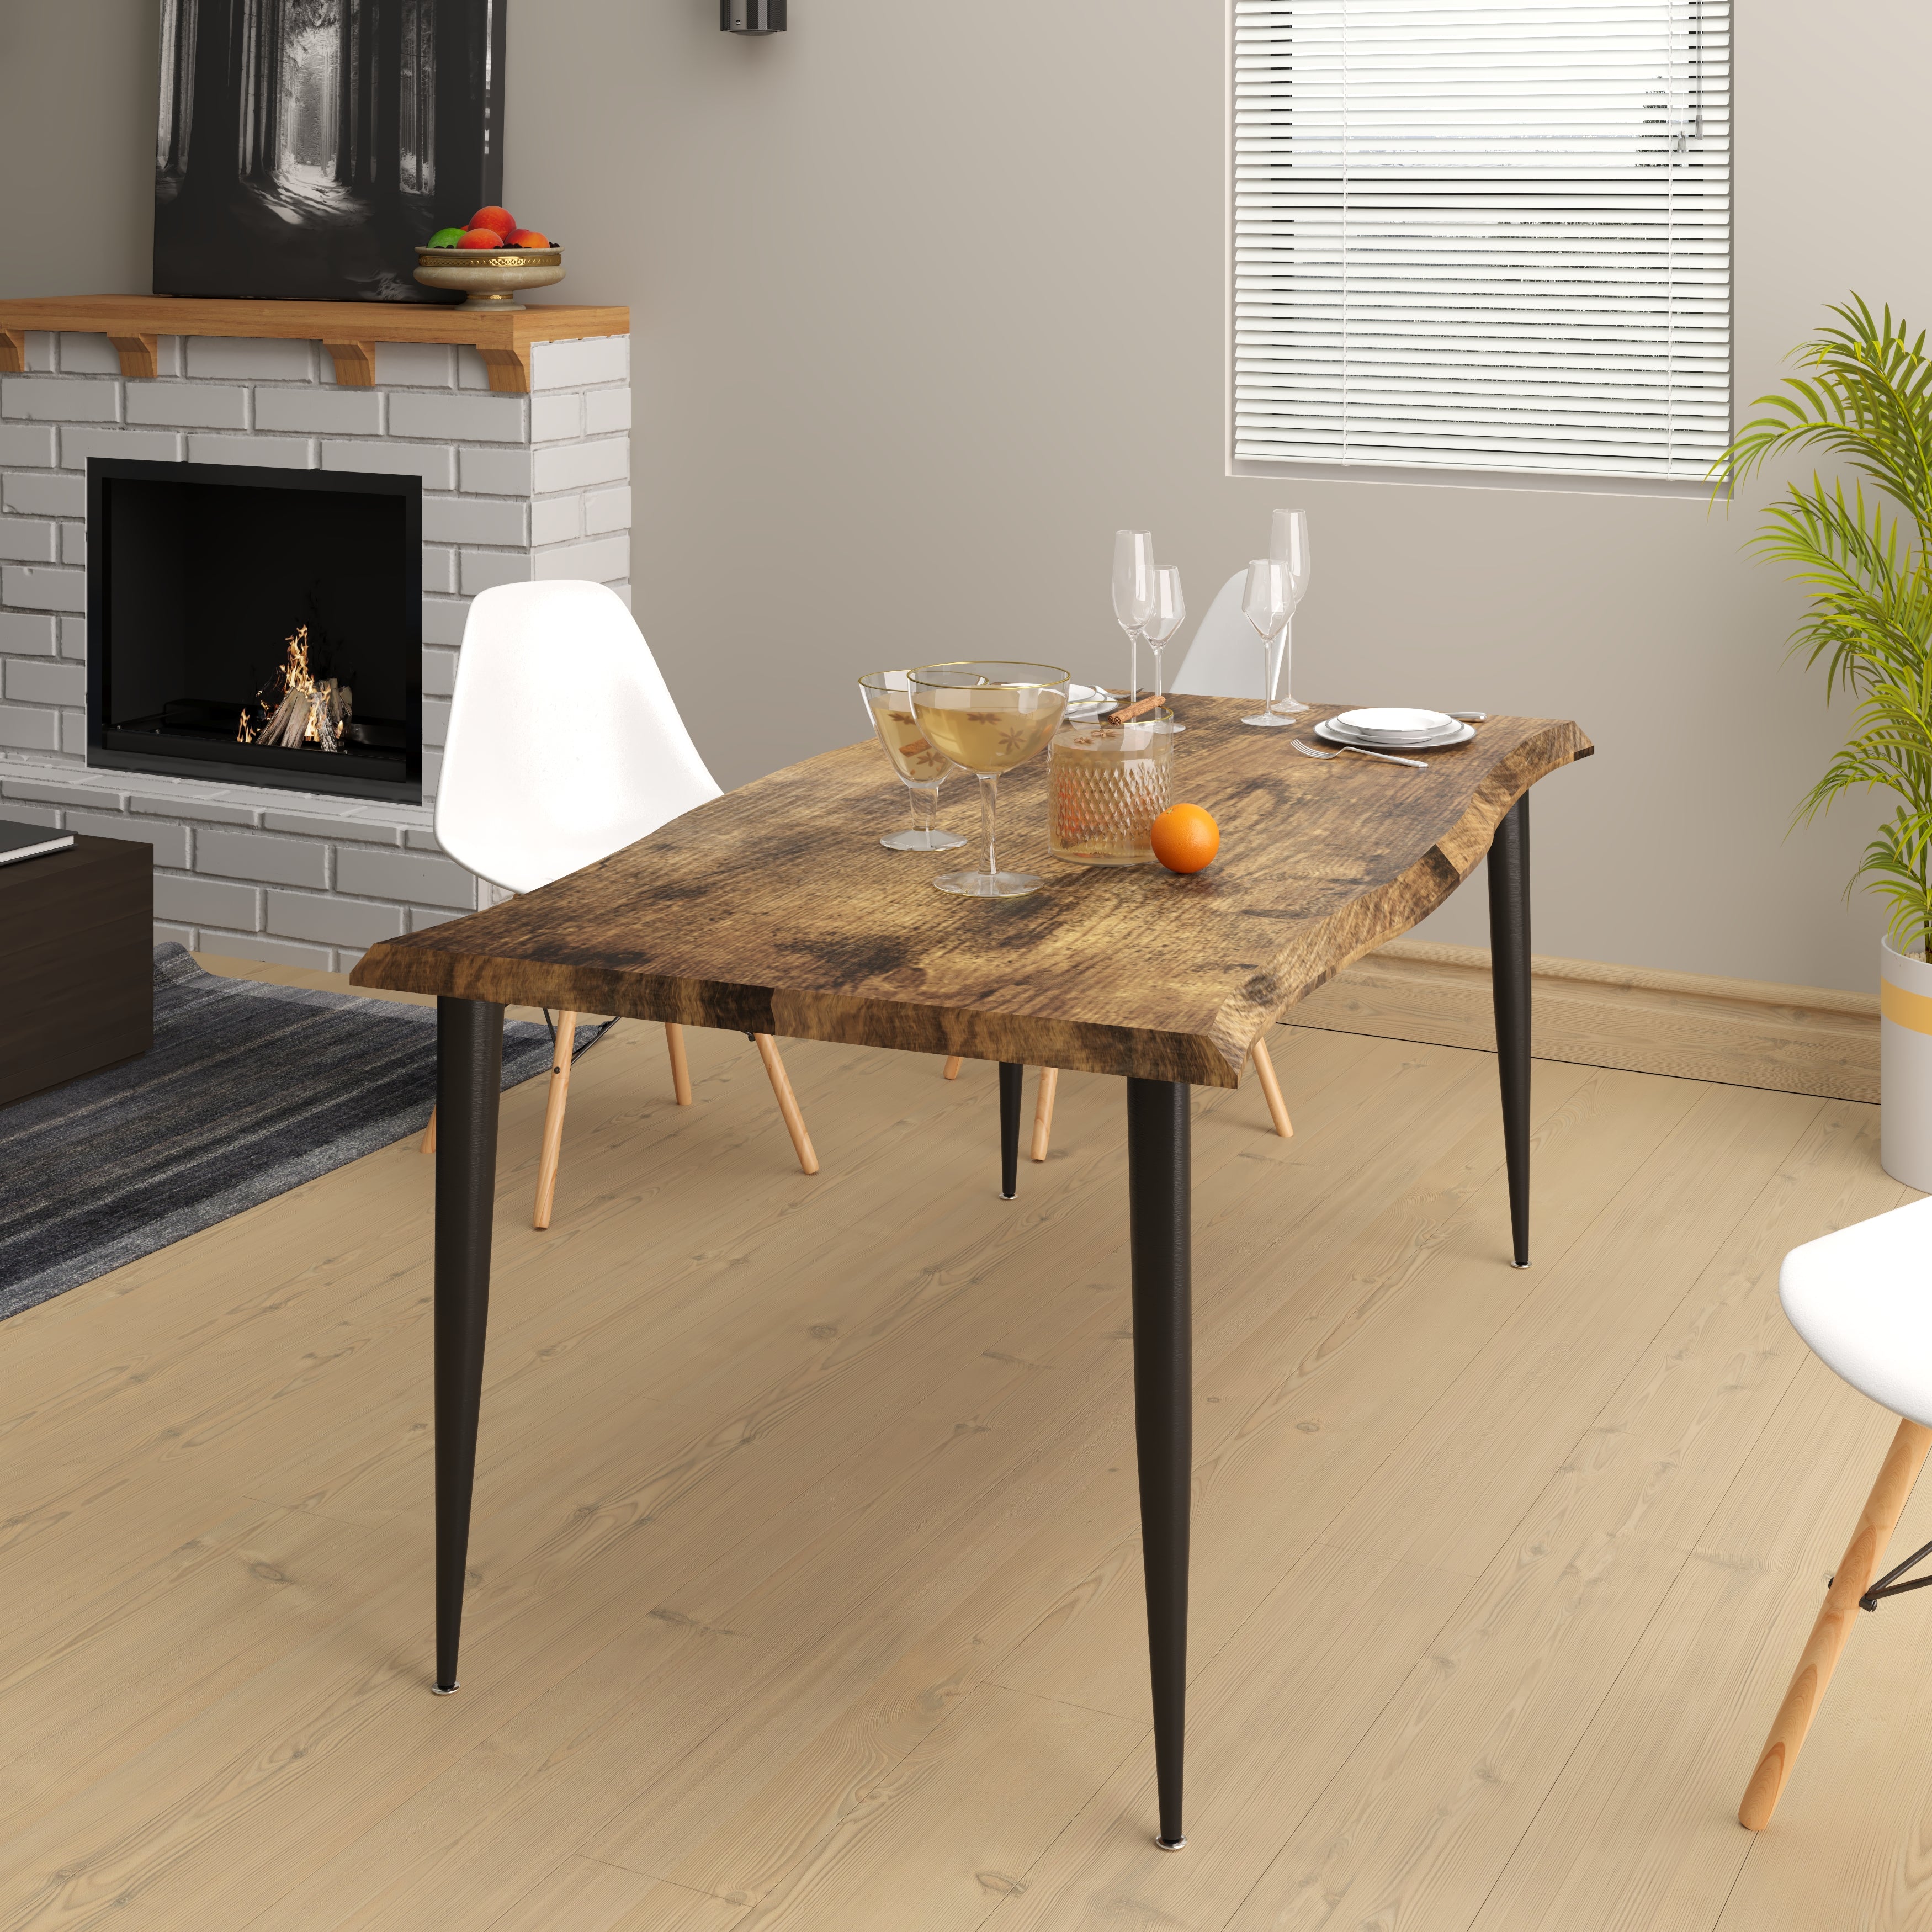 The Velets Lia Dining Table MDF Top With Tapered Legs